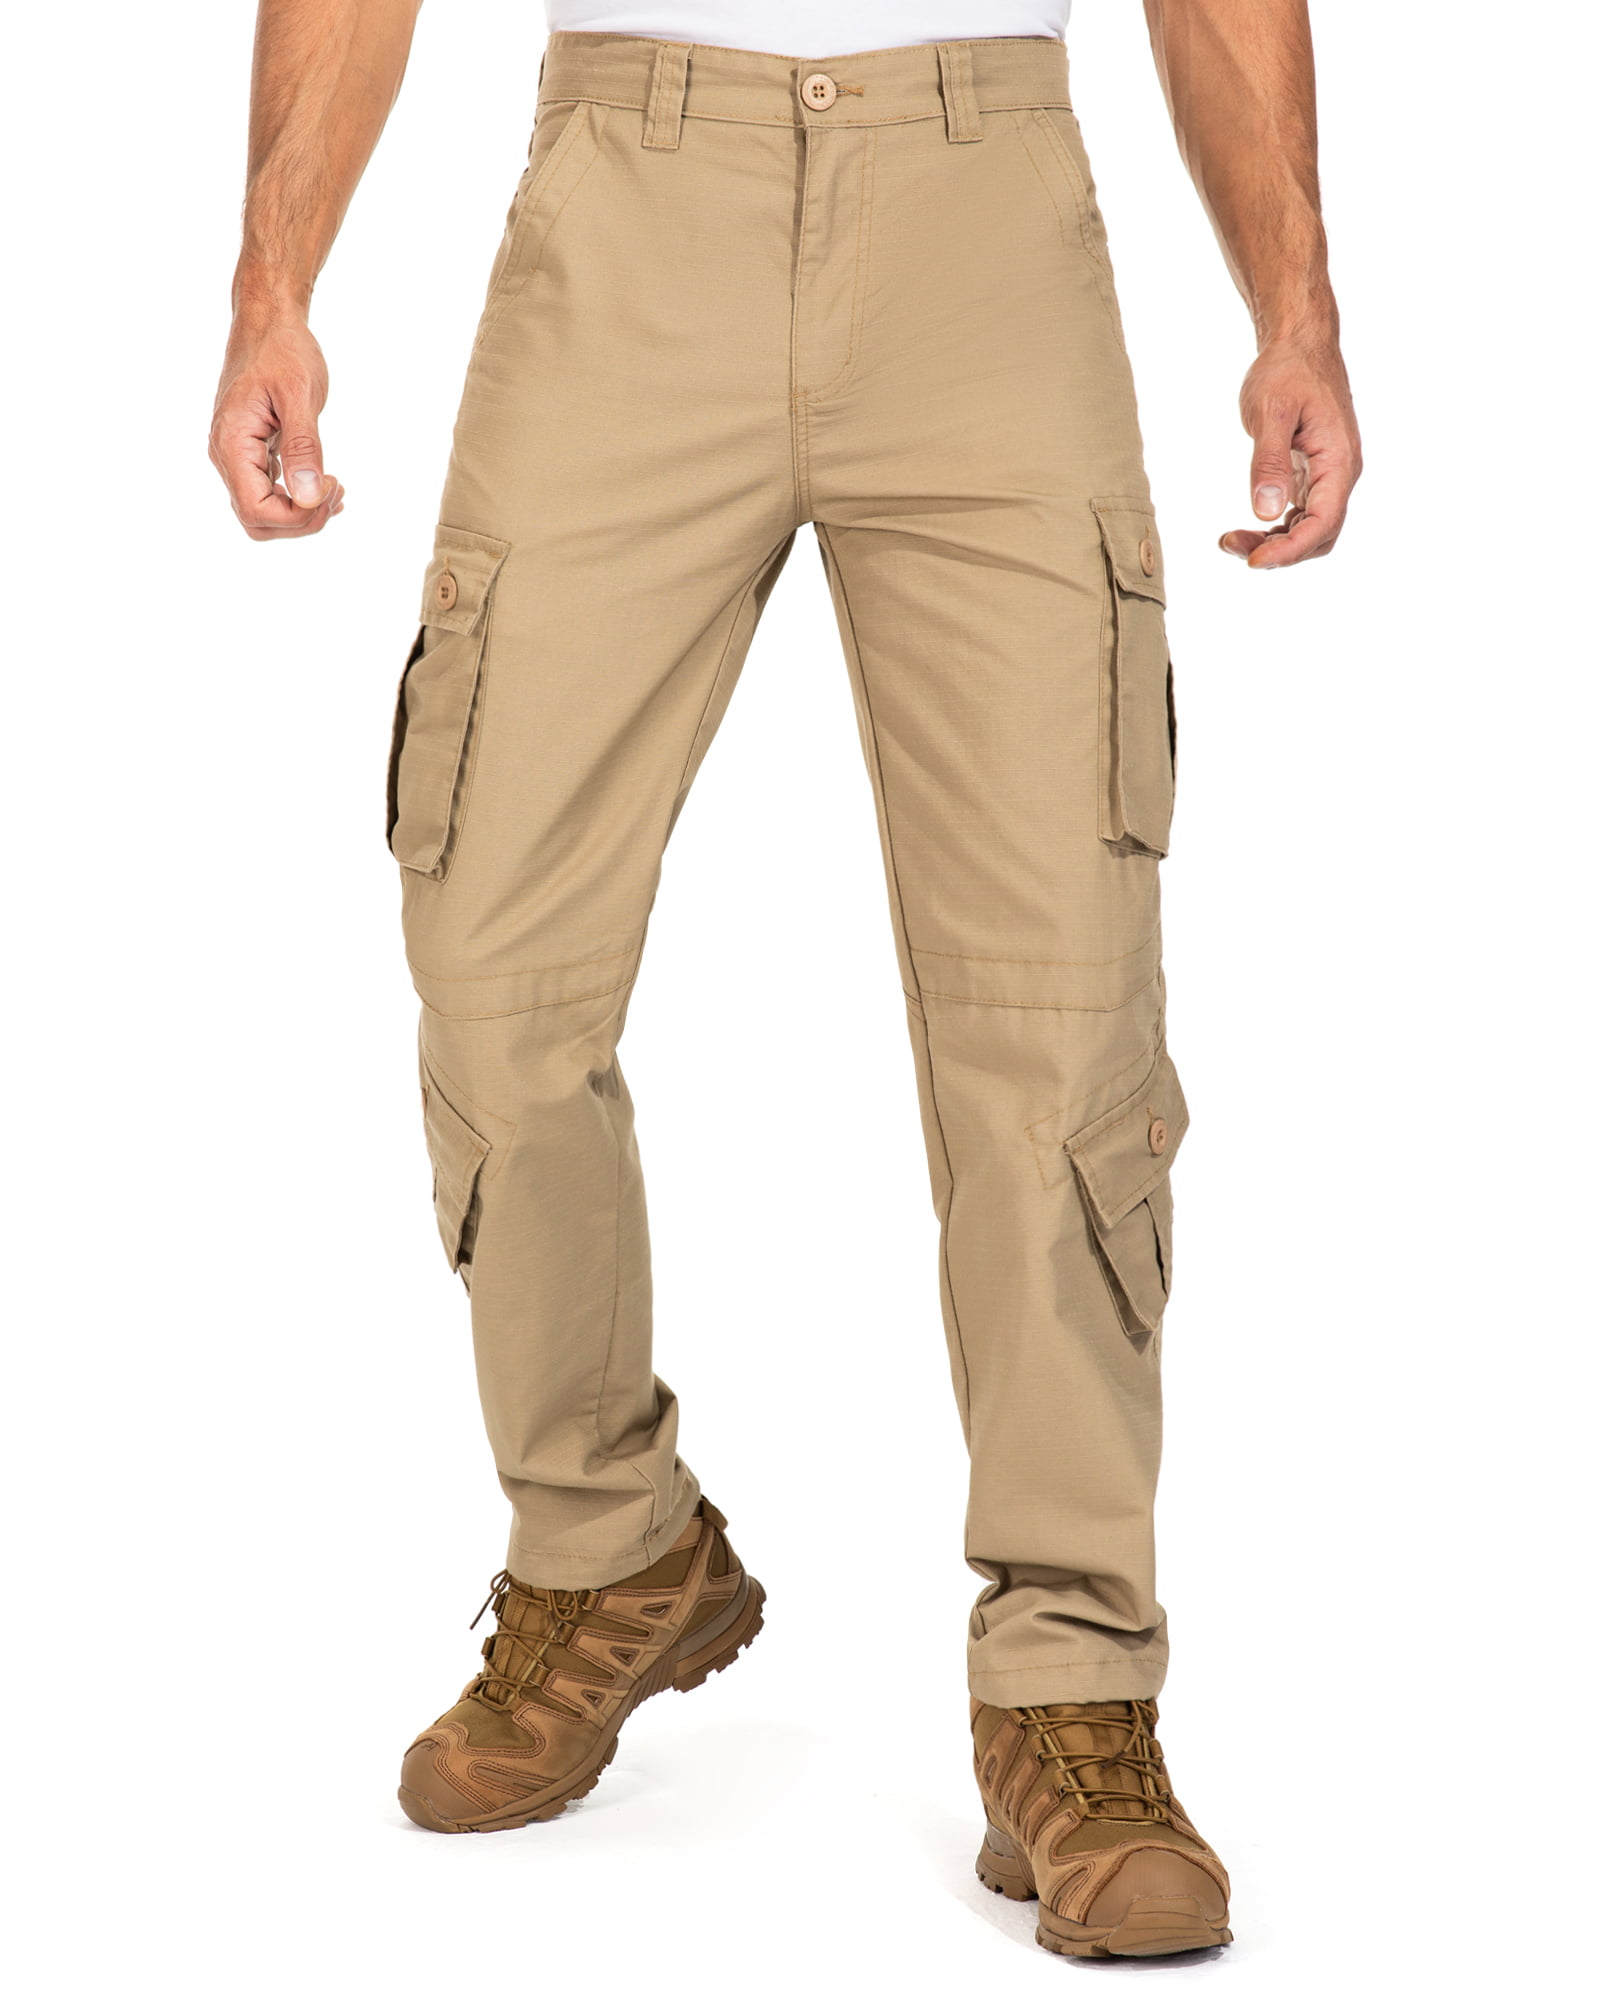 TRGPSG Men's Casual Work Cargo Pants Outdoor Hiking Pants with 8 ...